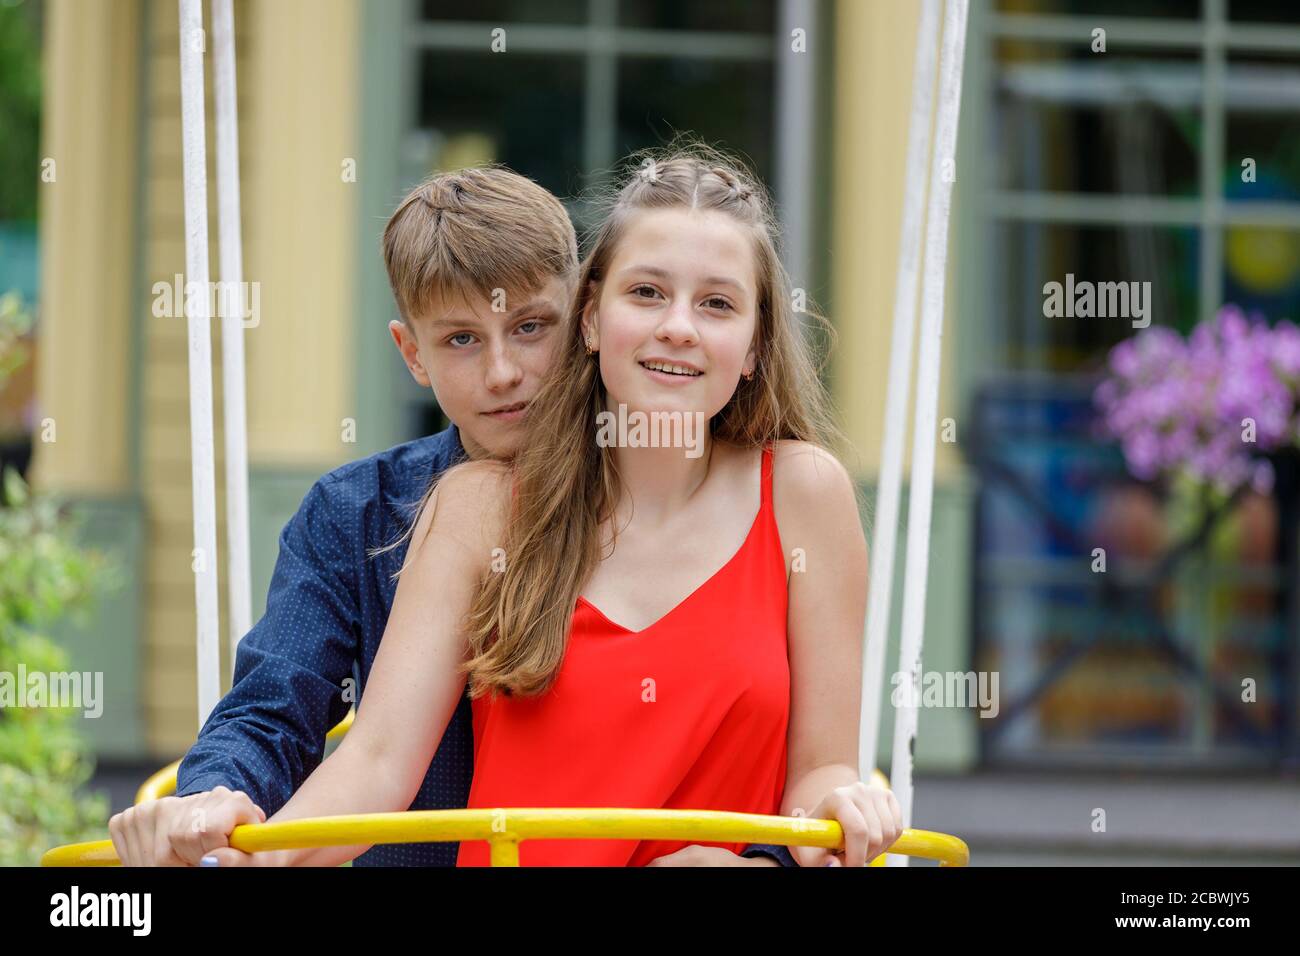 young couple having fun on a swing in the park Stock Photo